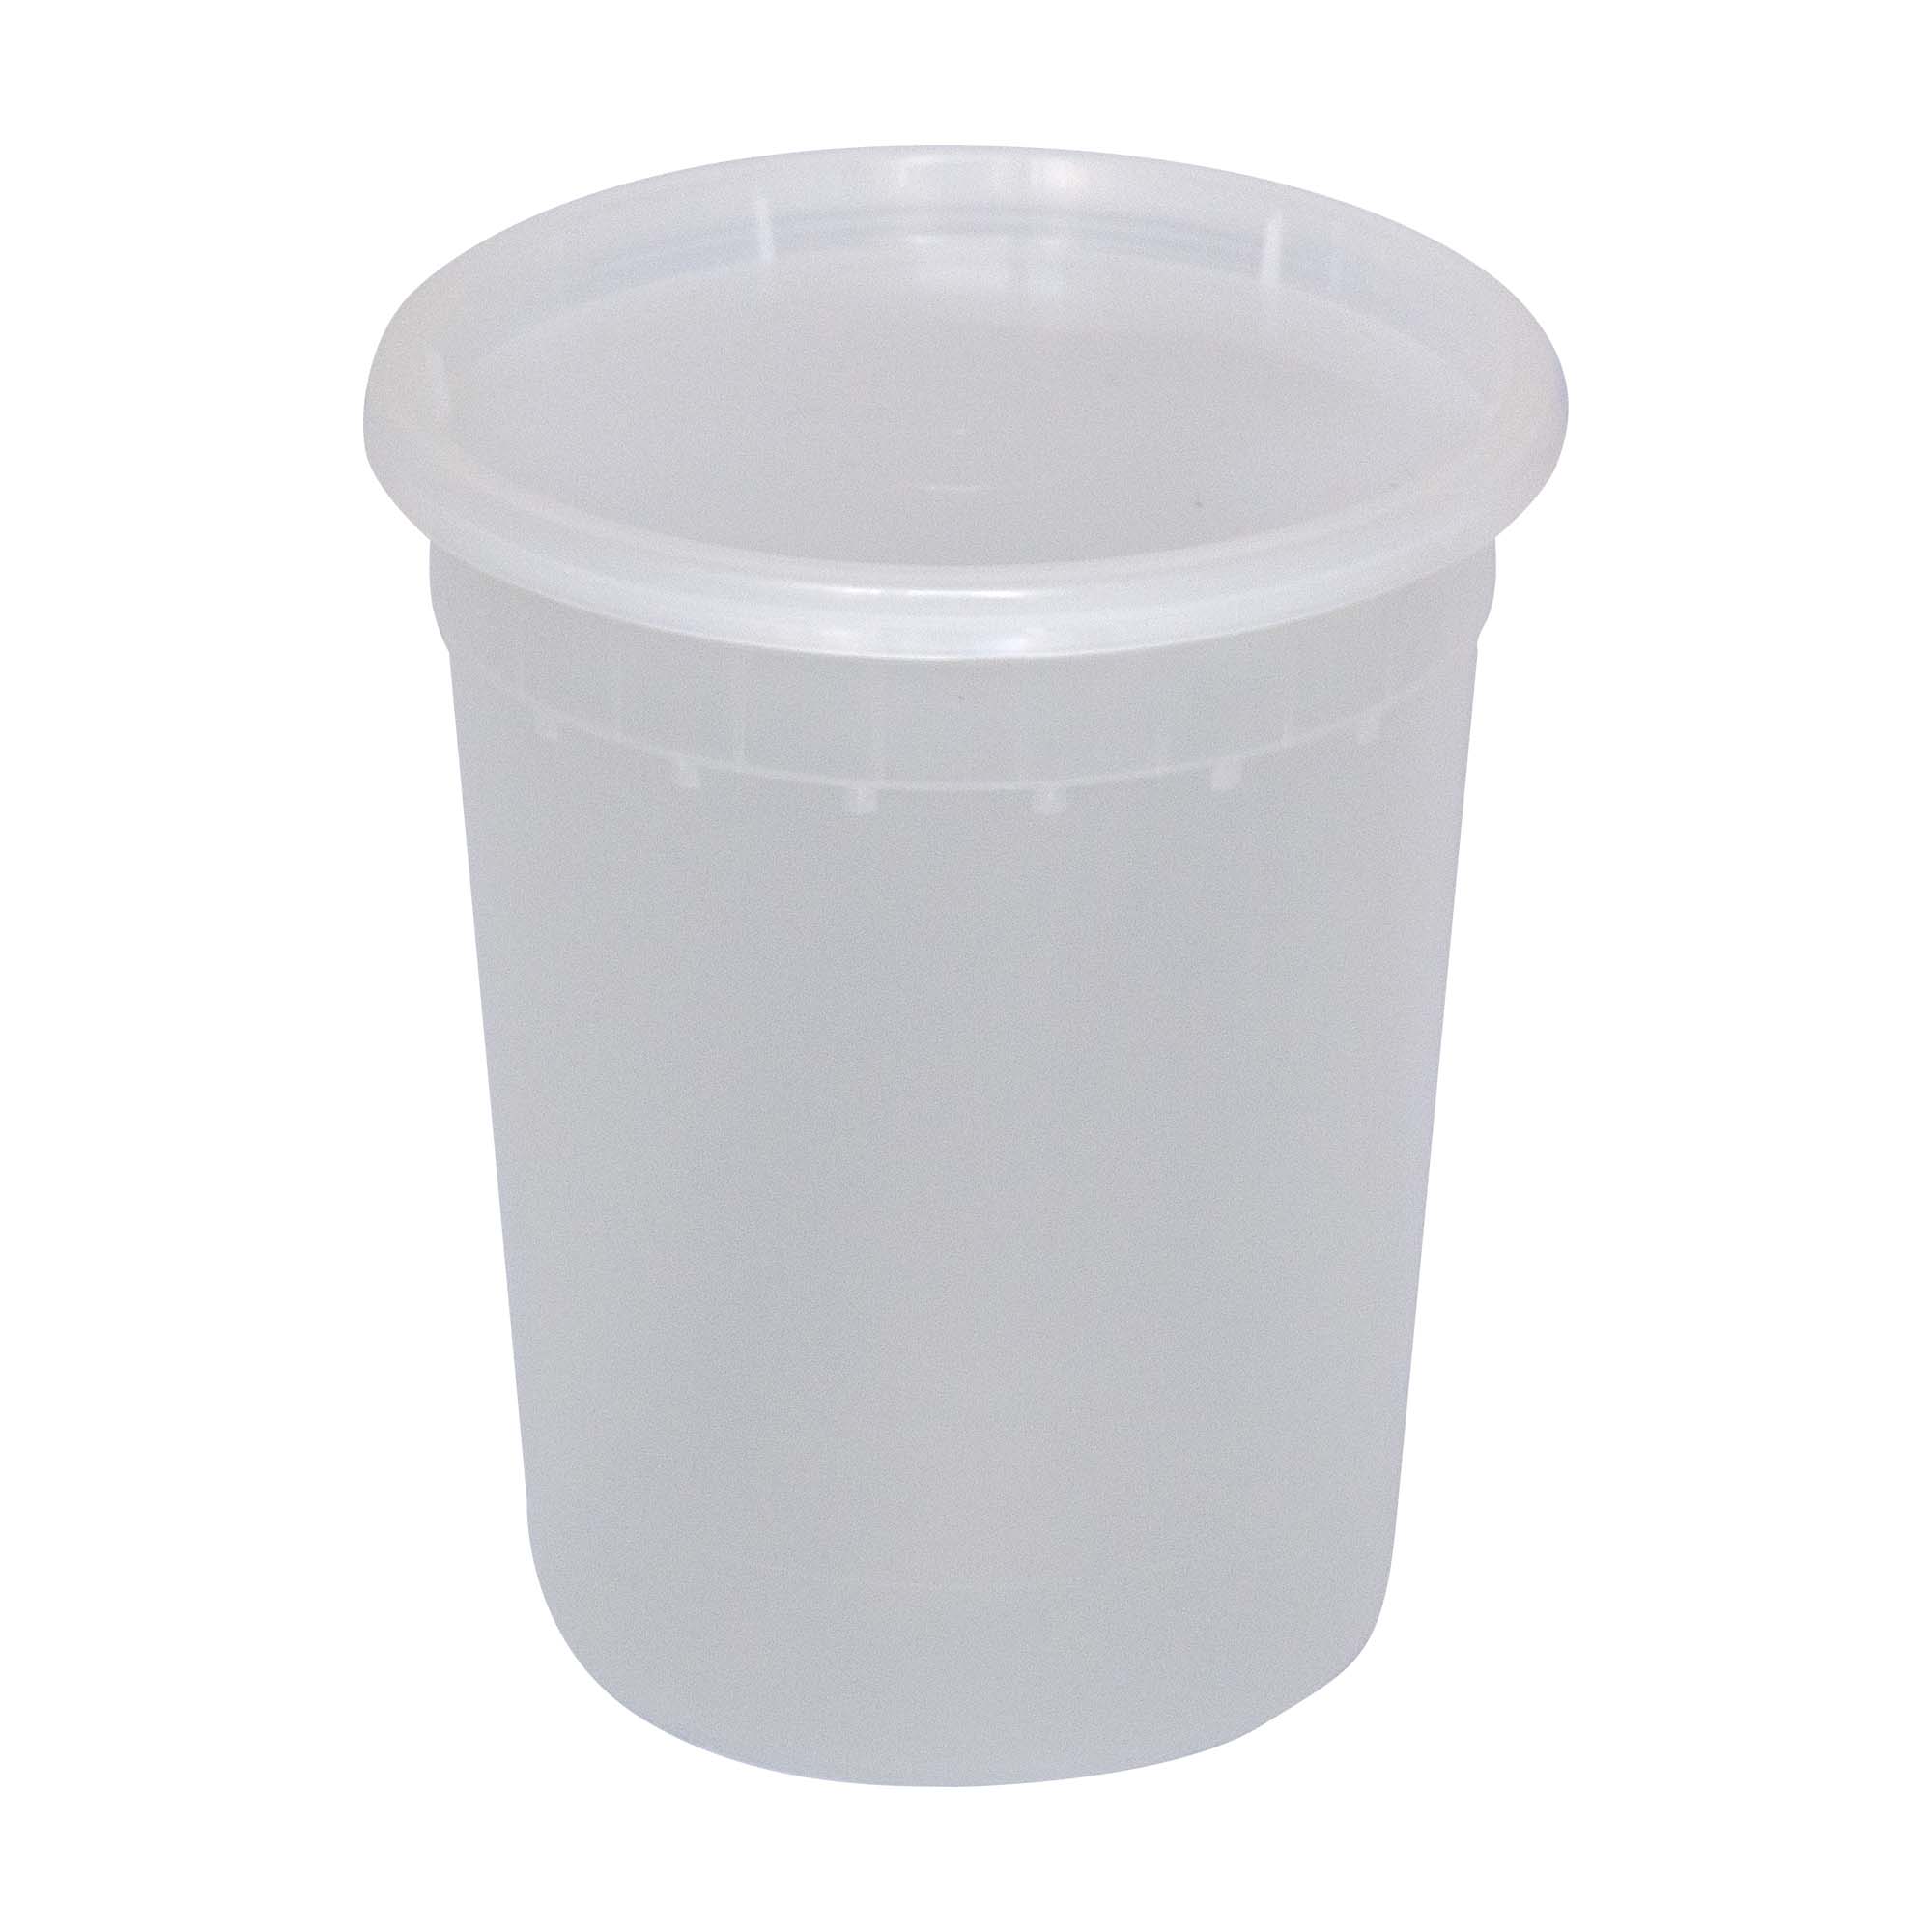 Deli Containers with Lids - Quart Containers with lids - Soup